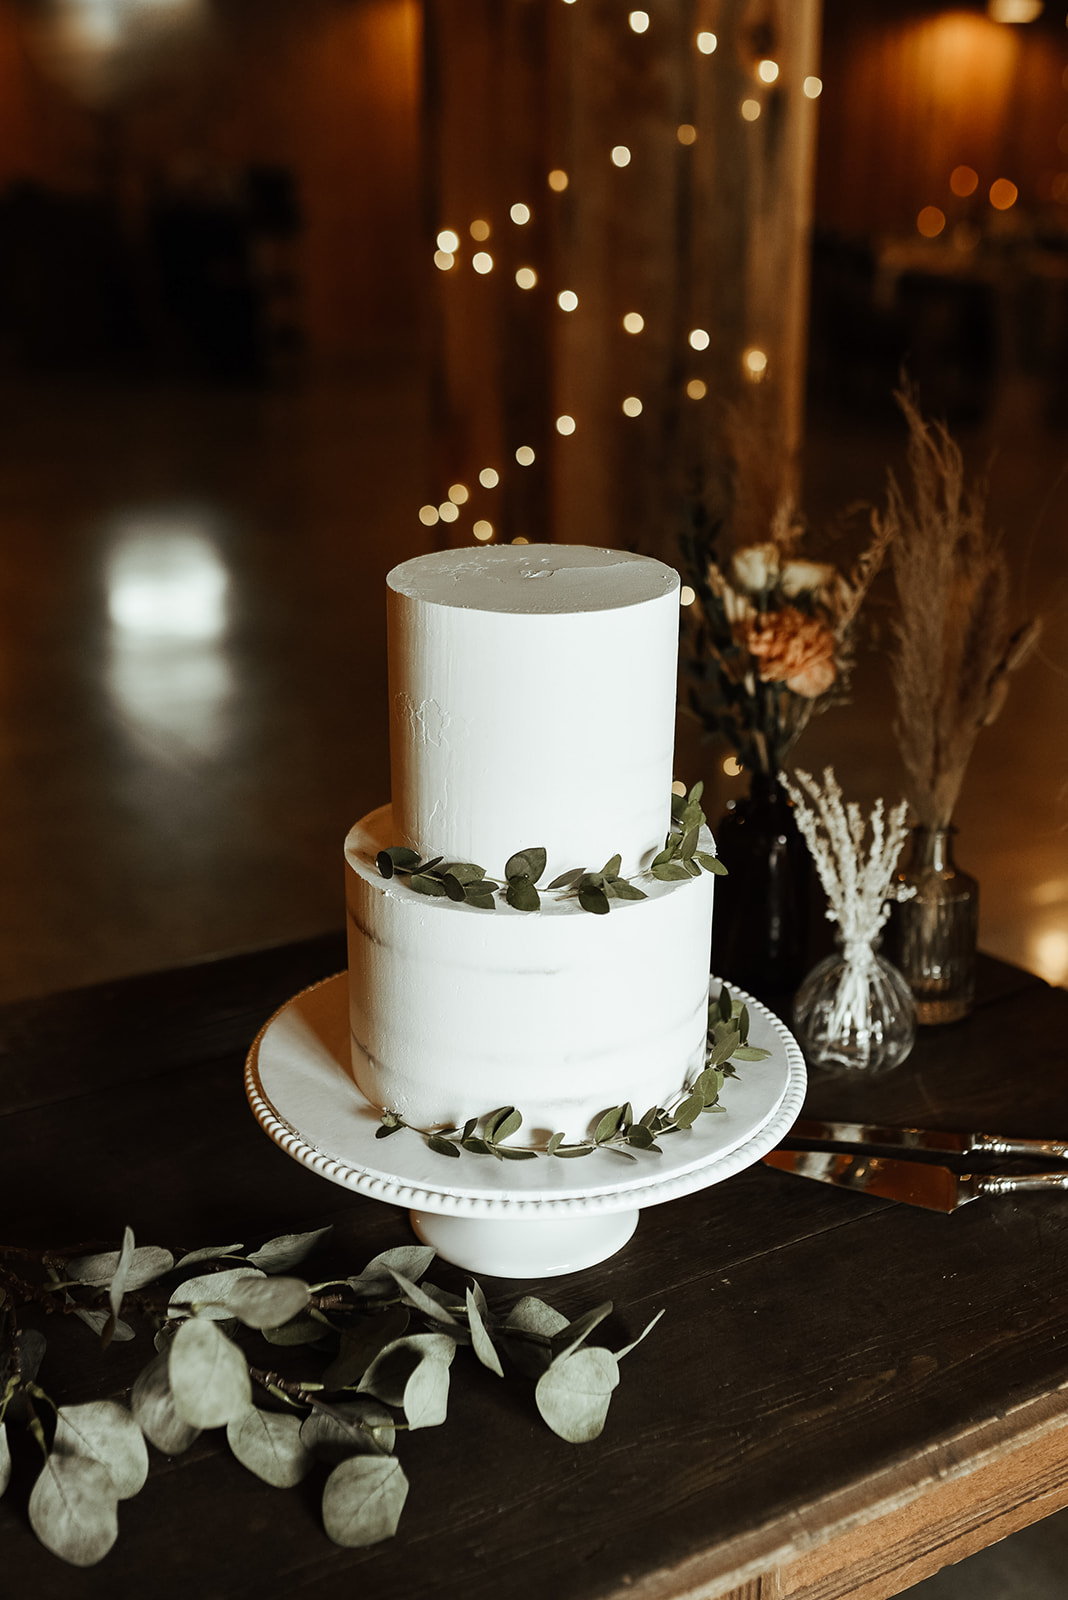 Yvonne’s Delightful Cakes, rustic wedding cake with dried florals